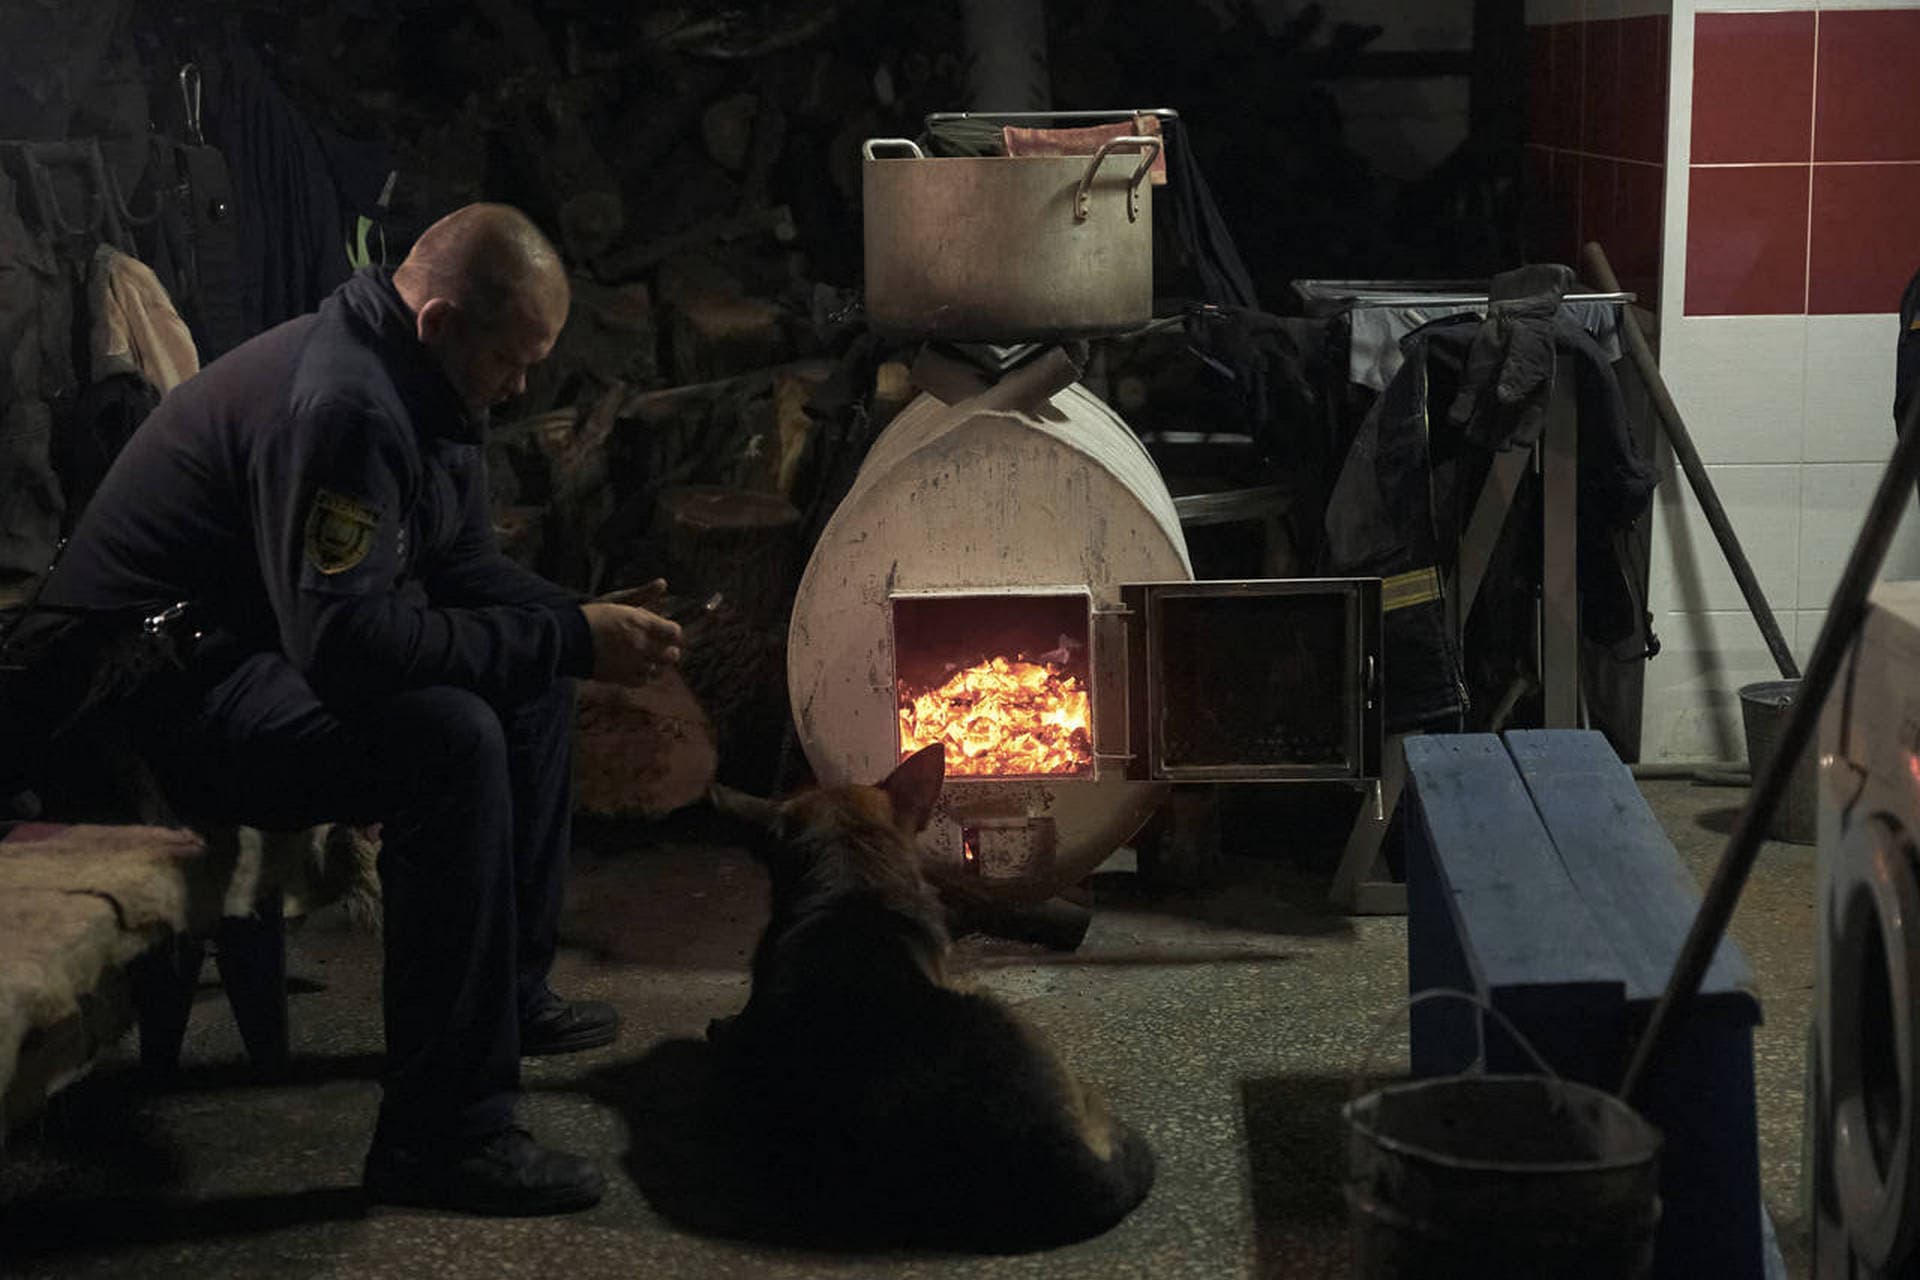 An emergency worker and his dog warm up in front of a wood-burning oven in a shelter in Bakhmut